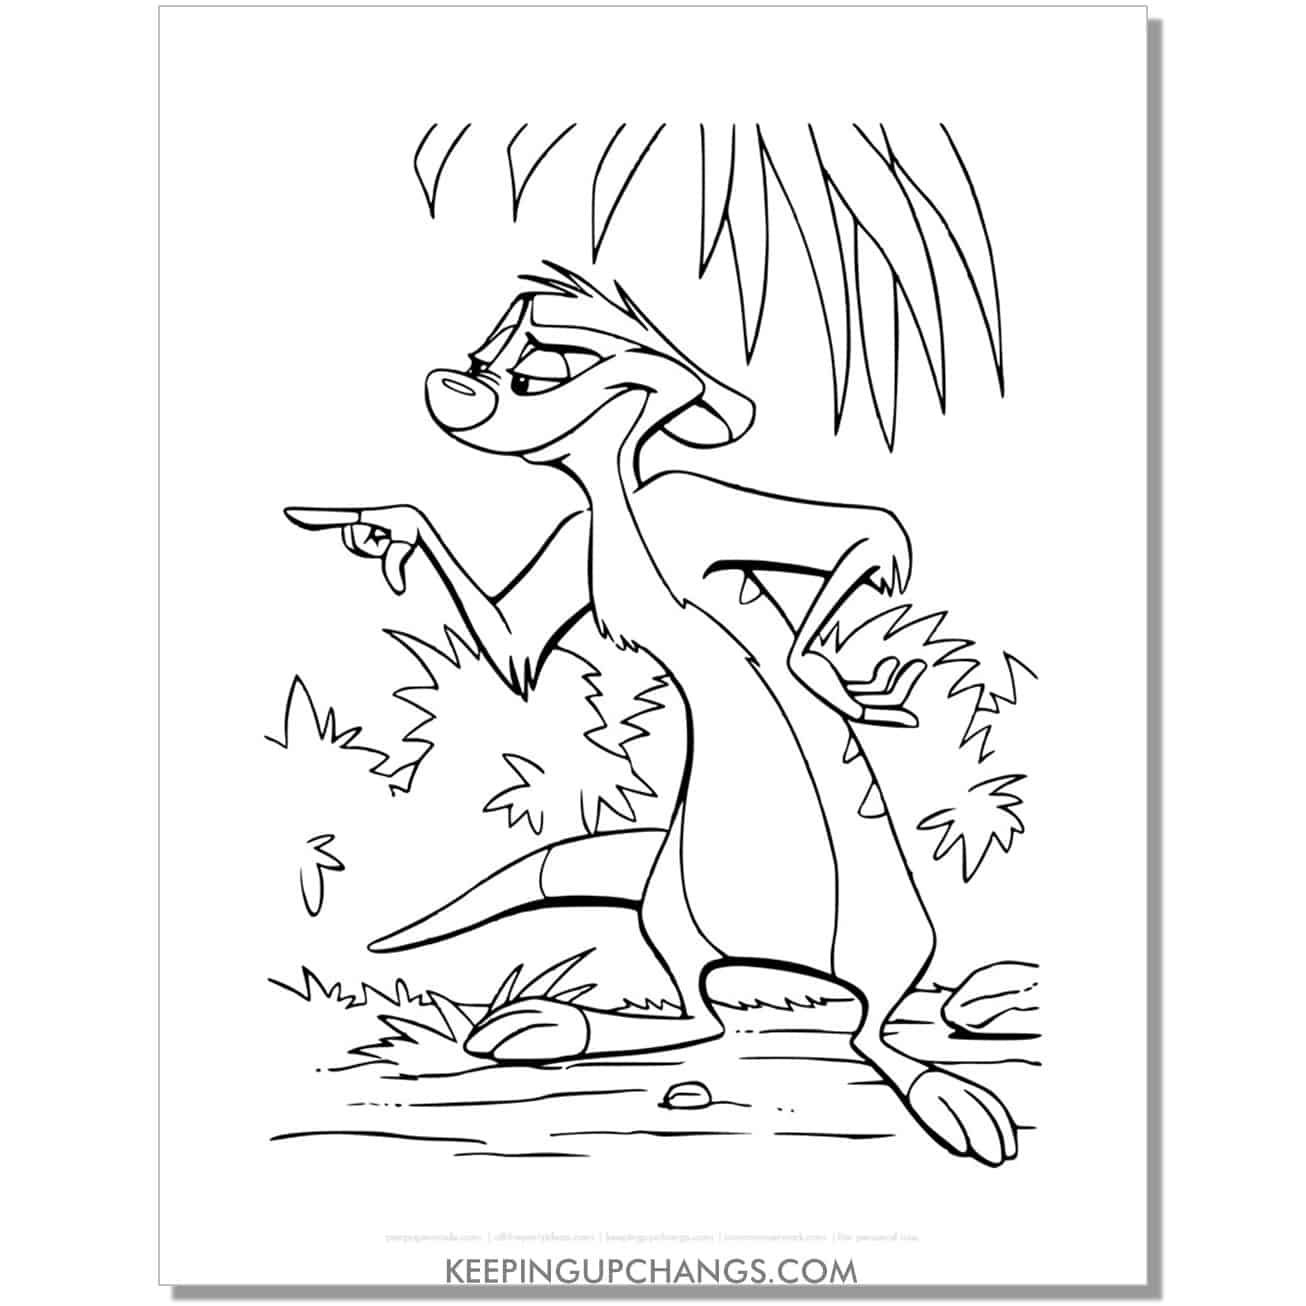 timon pointing finger lion king coloring page, sheet.